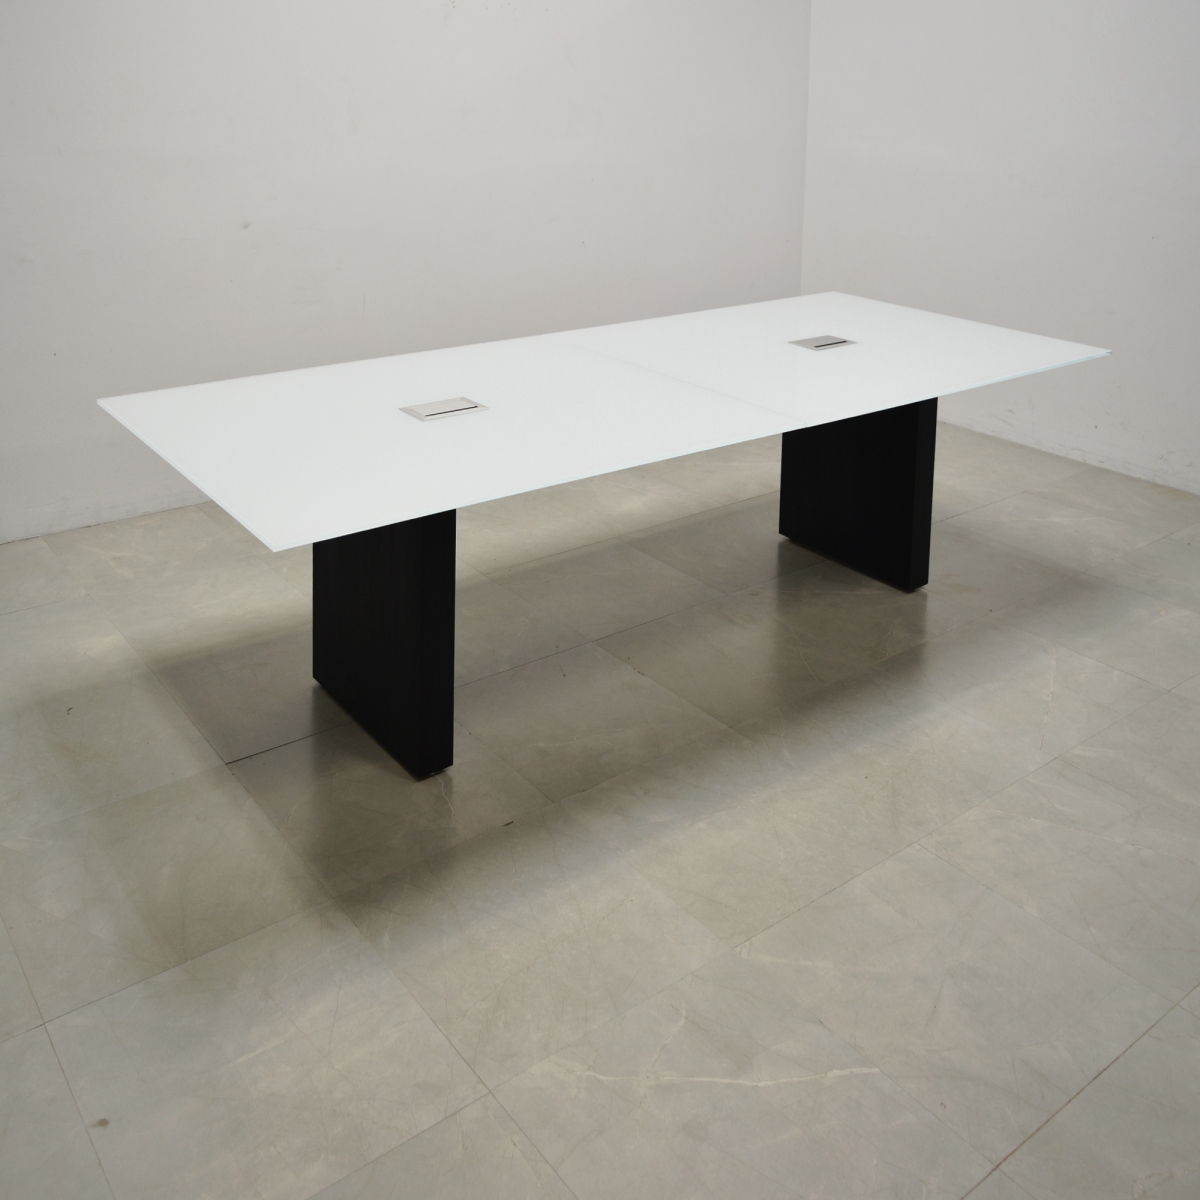 120 In. Axis Rectangular Conference Table- Stock #1002-S